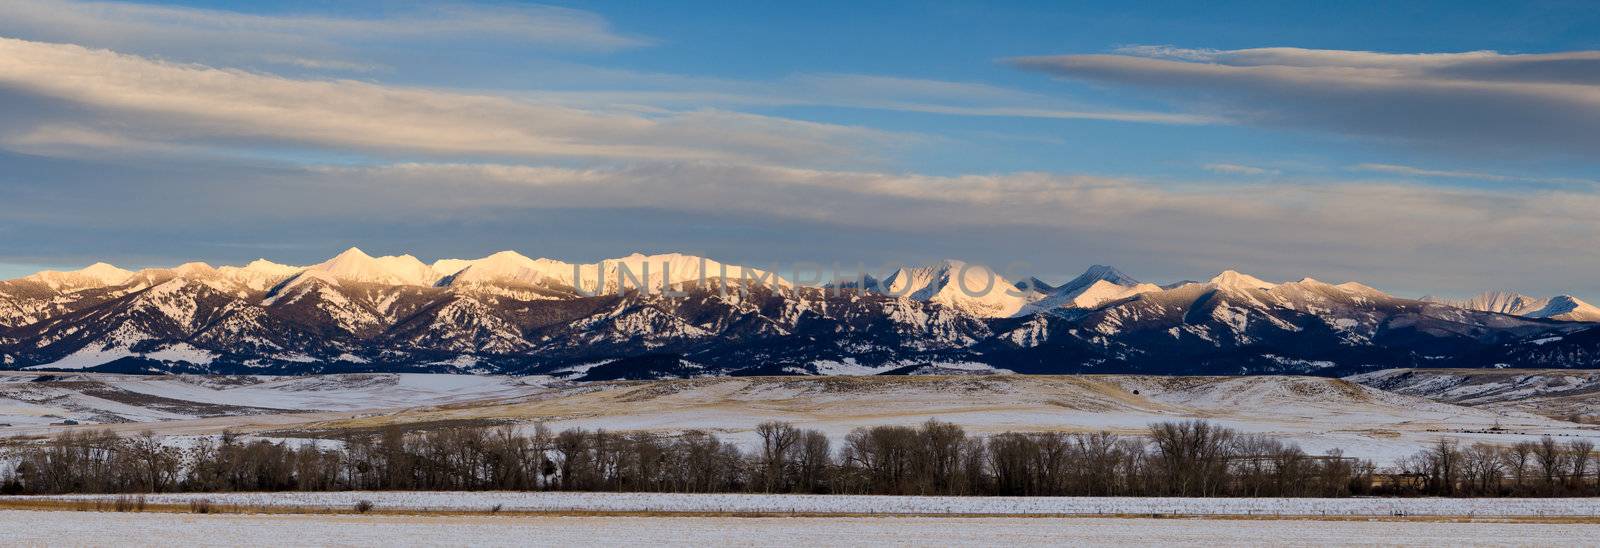 The Crazy Mountains in winter, Park County, Montana, USA by CharlesBolin